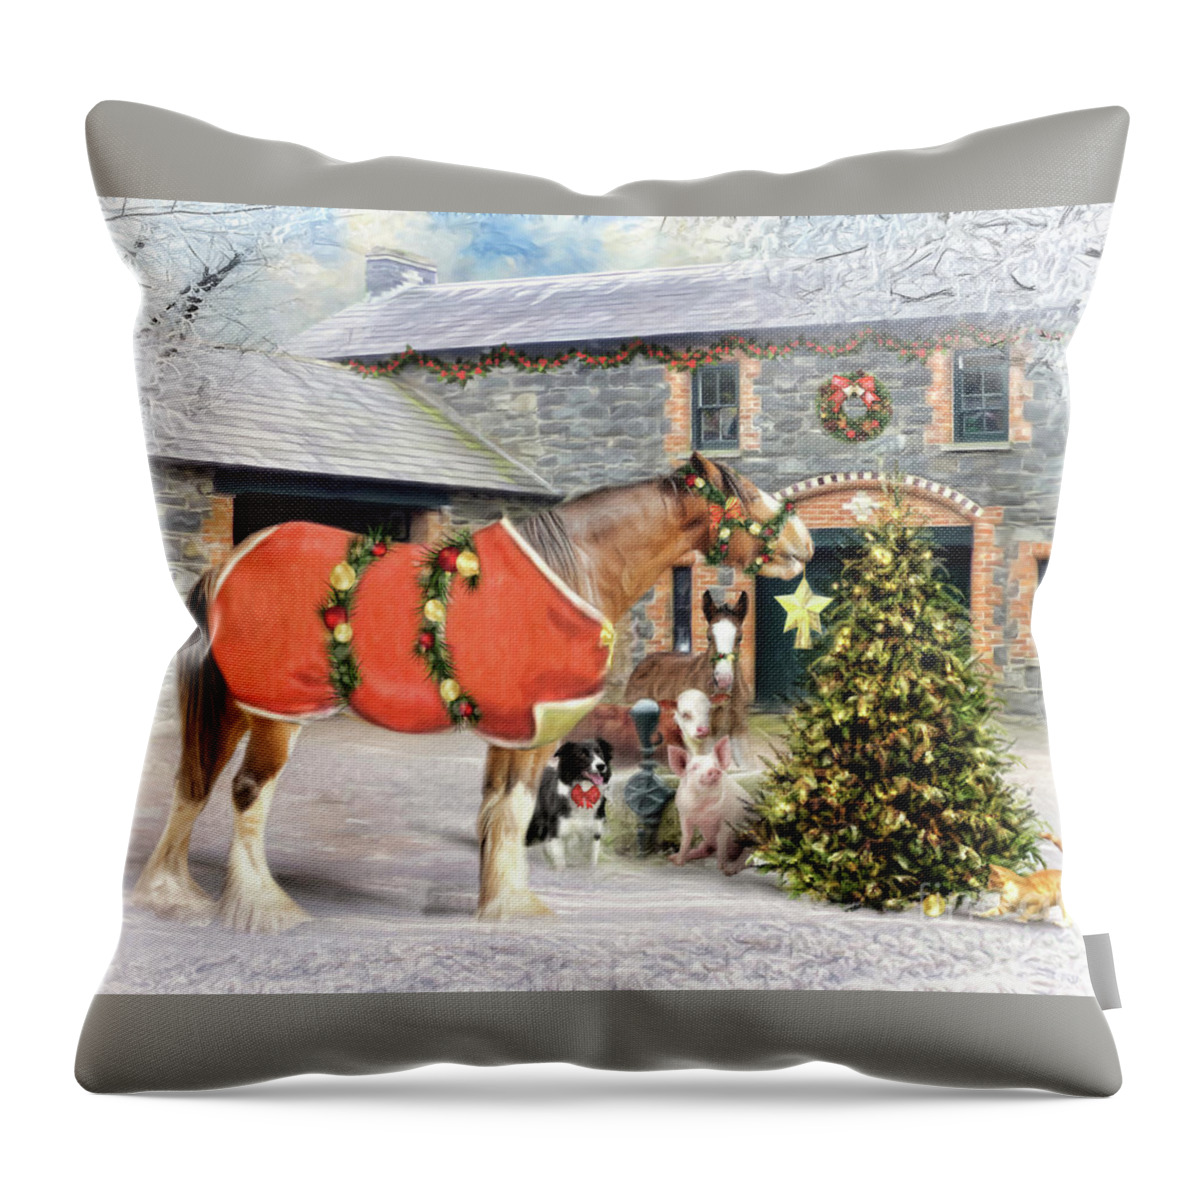 Clydesdale Throw Pillow featuring the digital art The Christmas Star by Trudi Simmonds